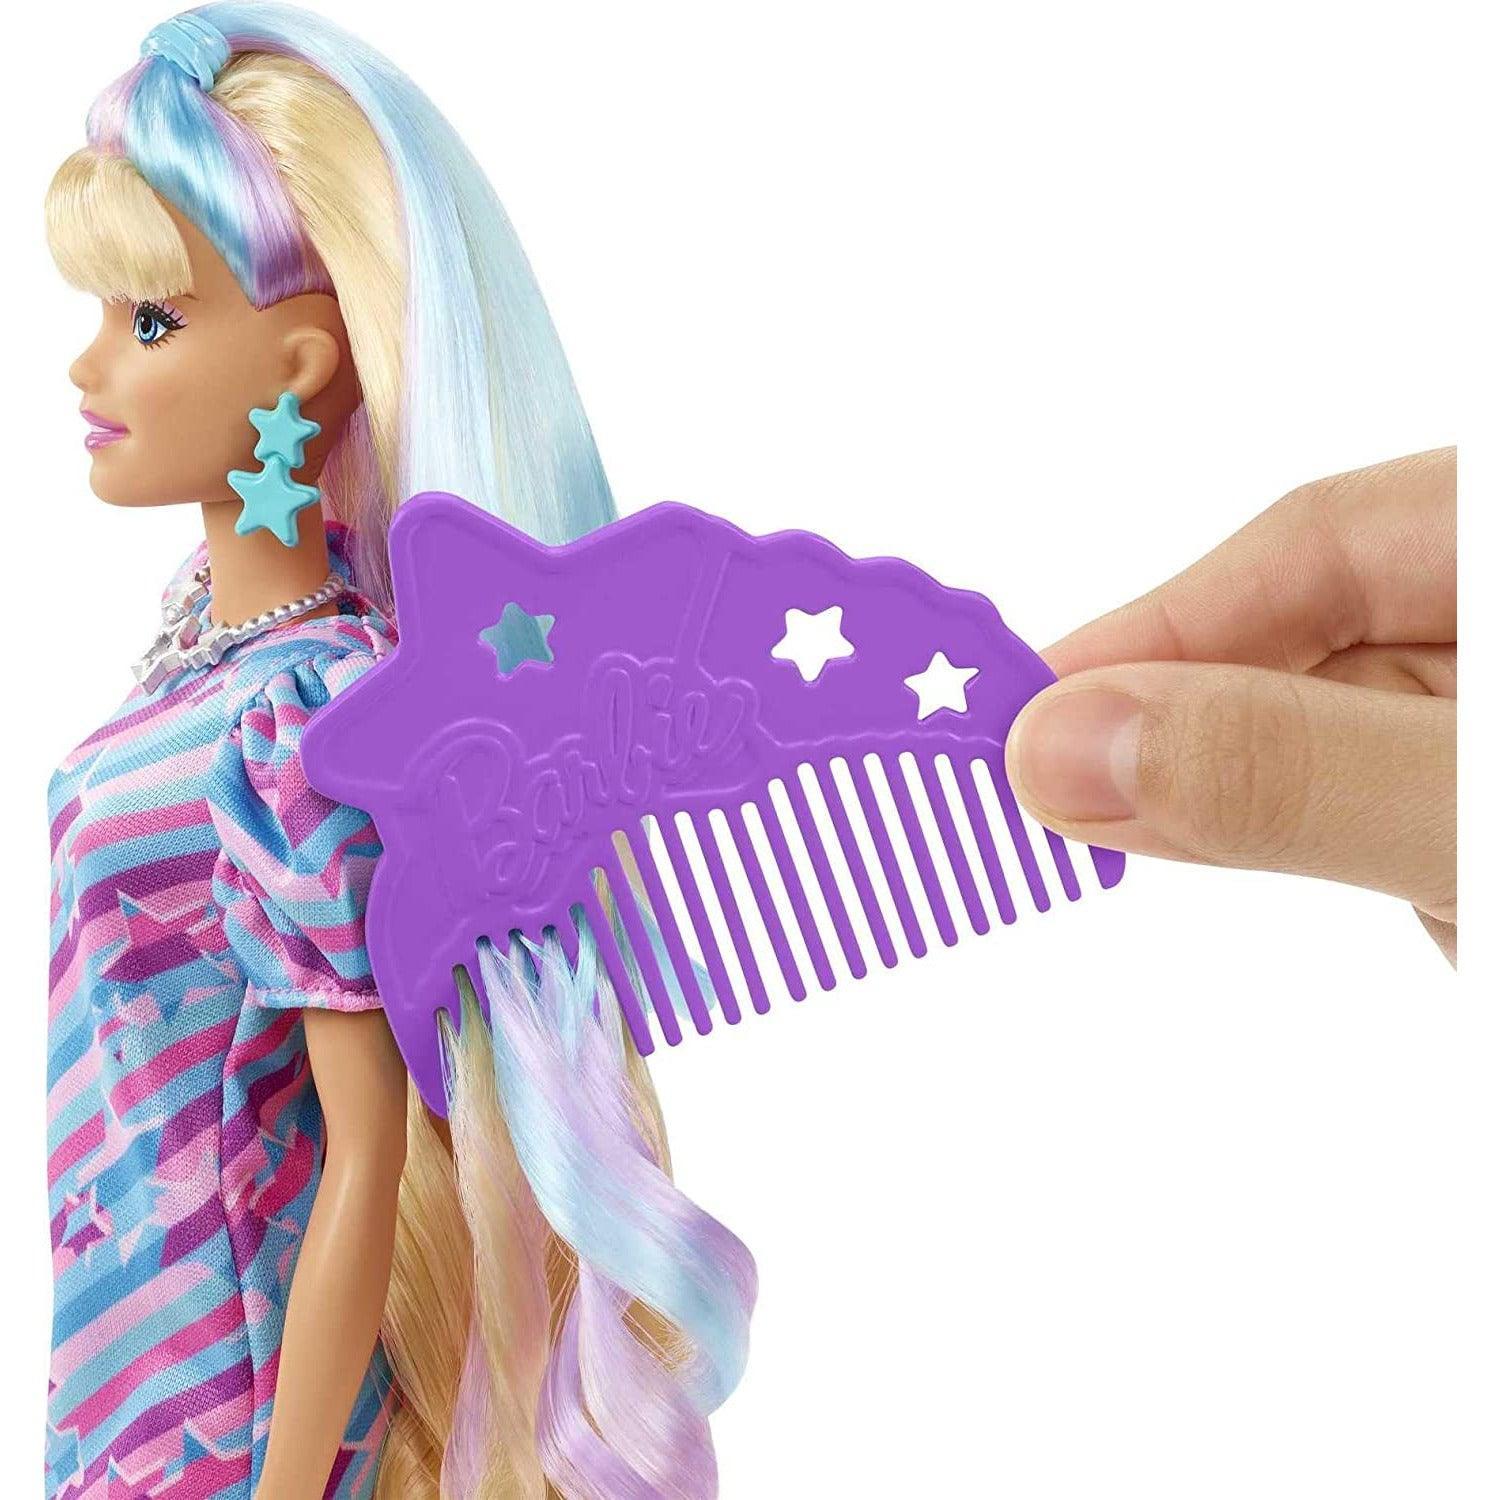 Barbie Totally Hair Star-Themed Doll, 8.5 inch Fantasy Hair, Dress, 15 Hair & Fashion Play Accessories (8 with Color Change Feature) - BumbleToys - 2-4 Years, 3+ years, 4+ Years, 5-7 Years, Barbie, Dolls, Fashion Dolls & Accessories, Girls, Pre-Order